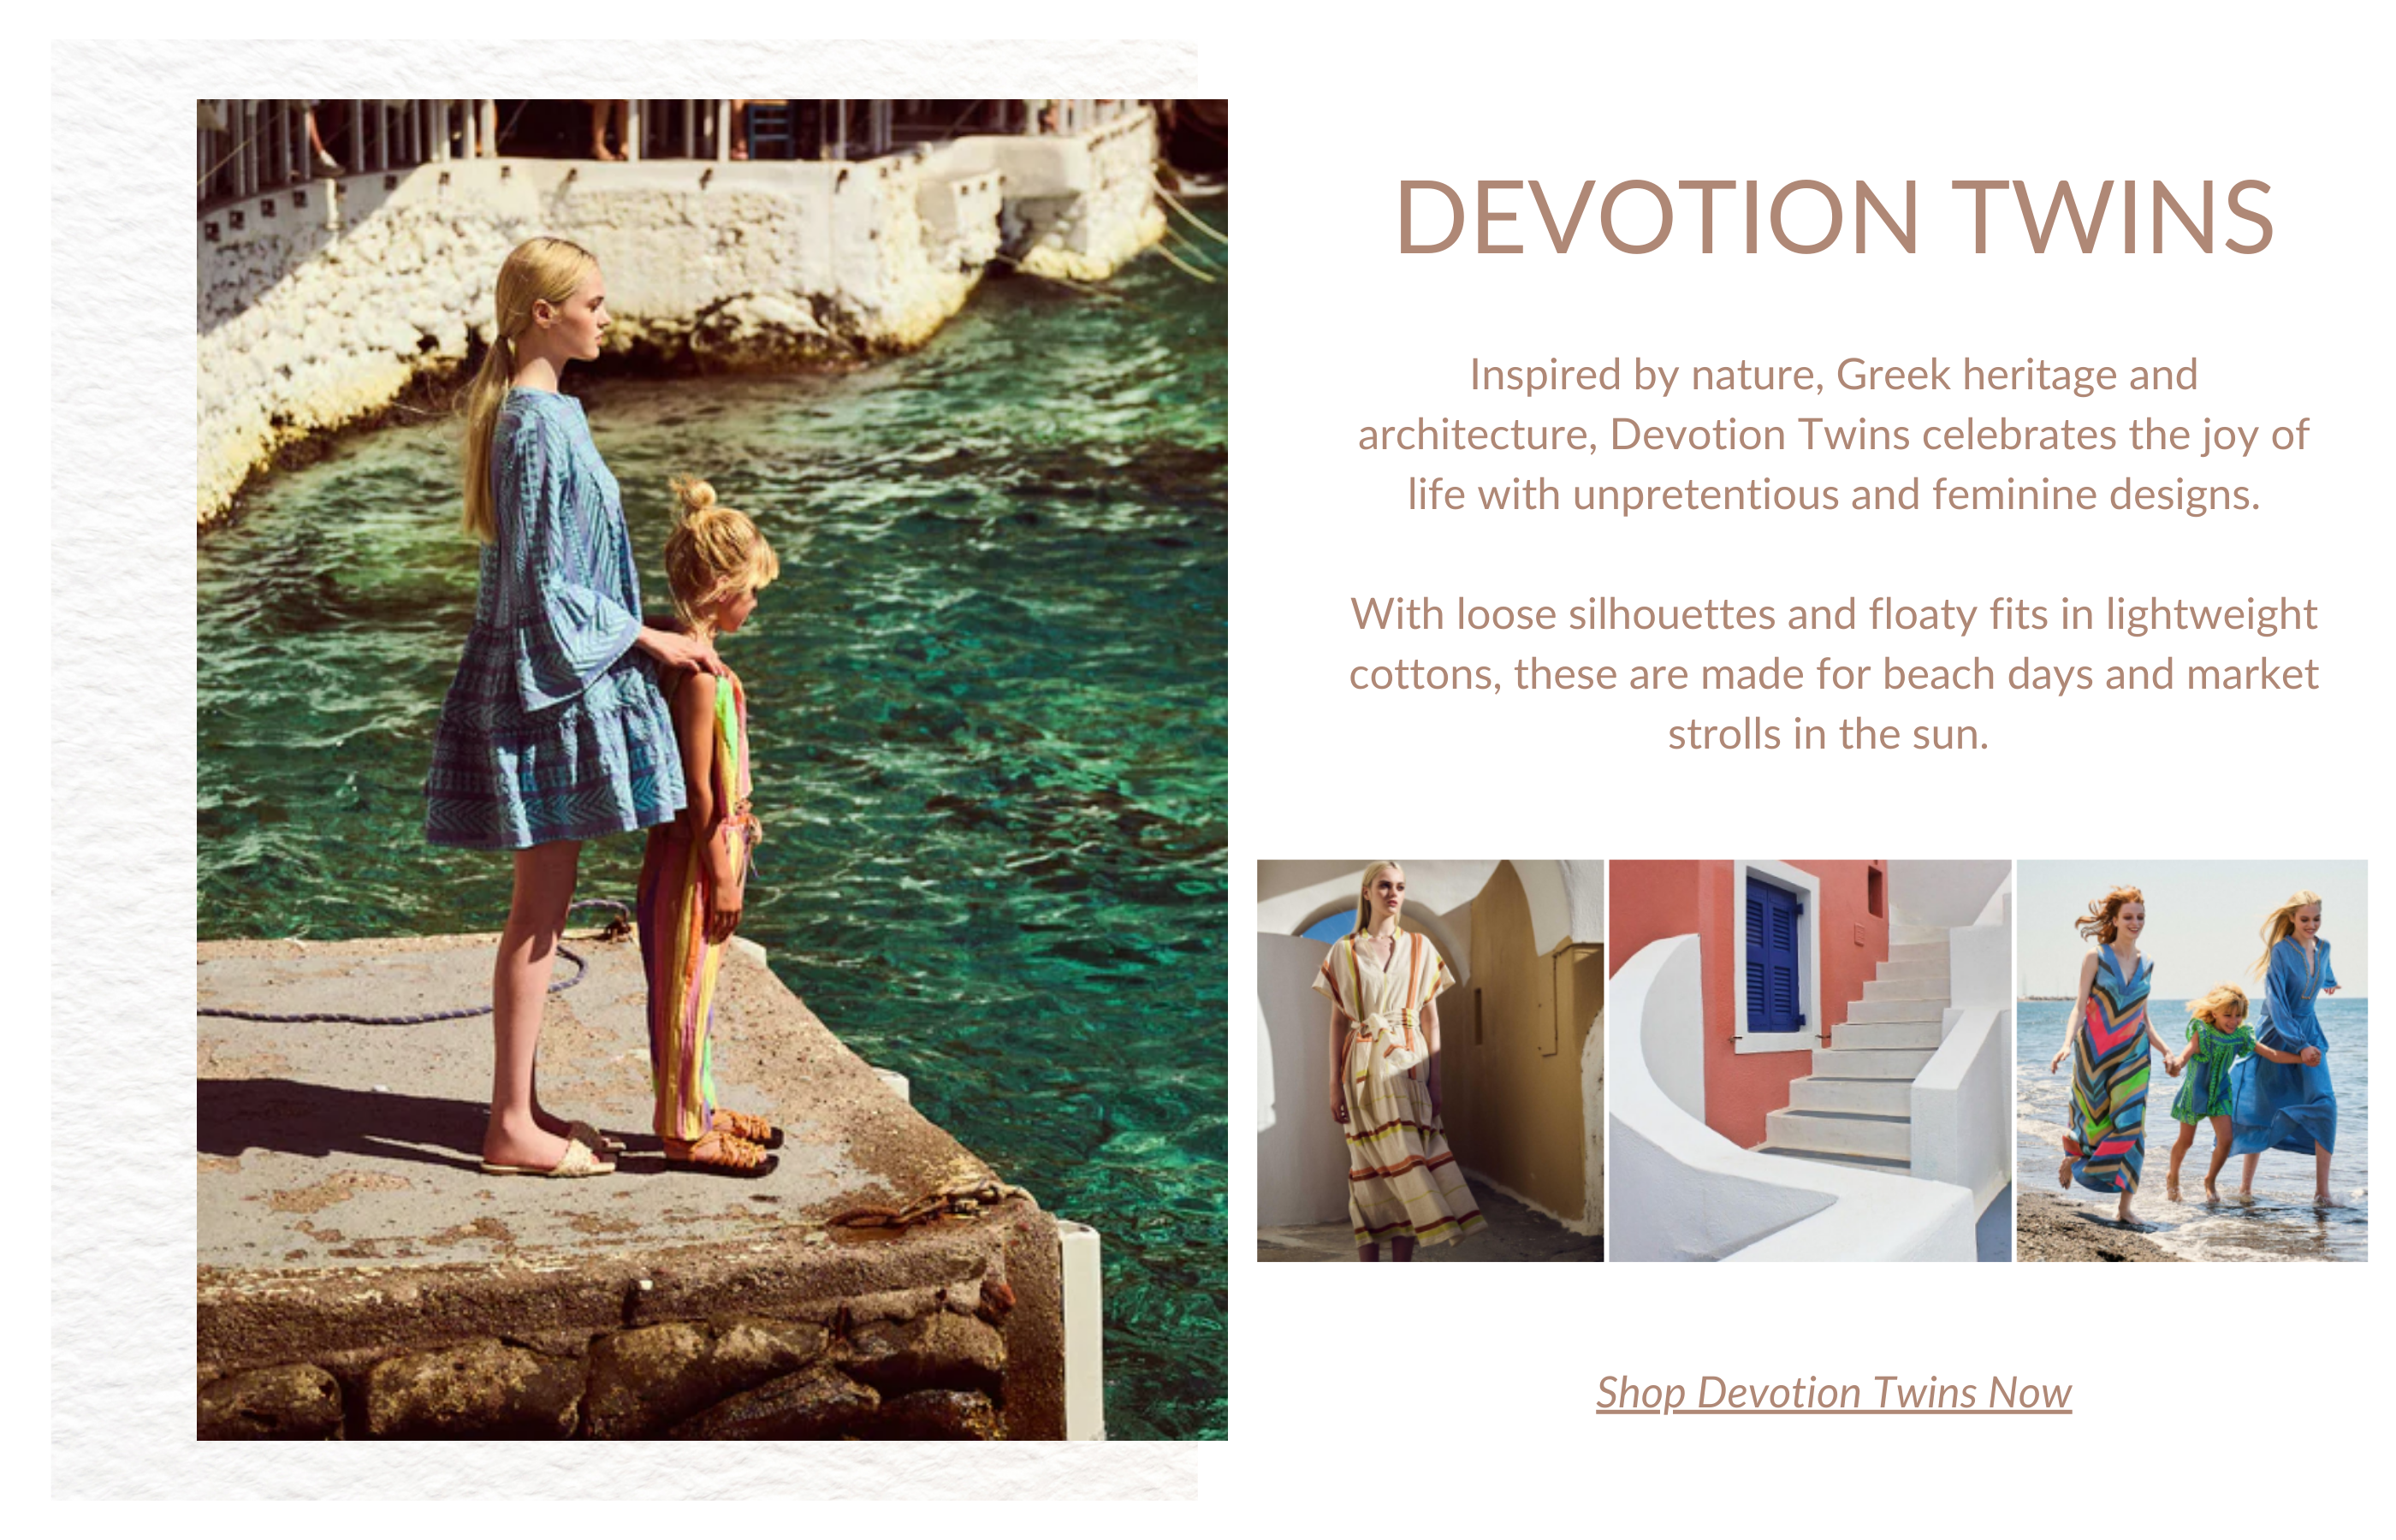 Models with Dresses standing by Sea with brand name 'Devotion Twins'